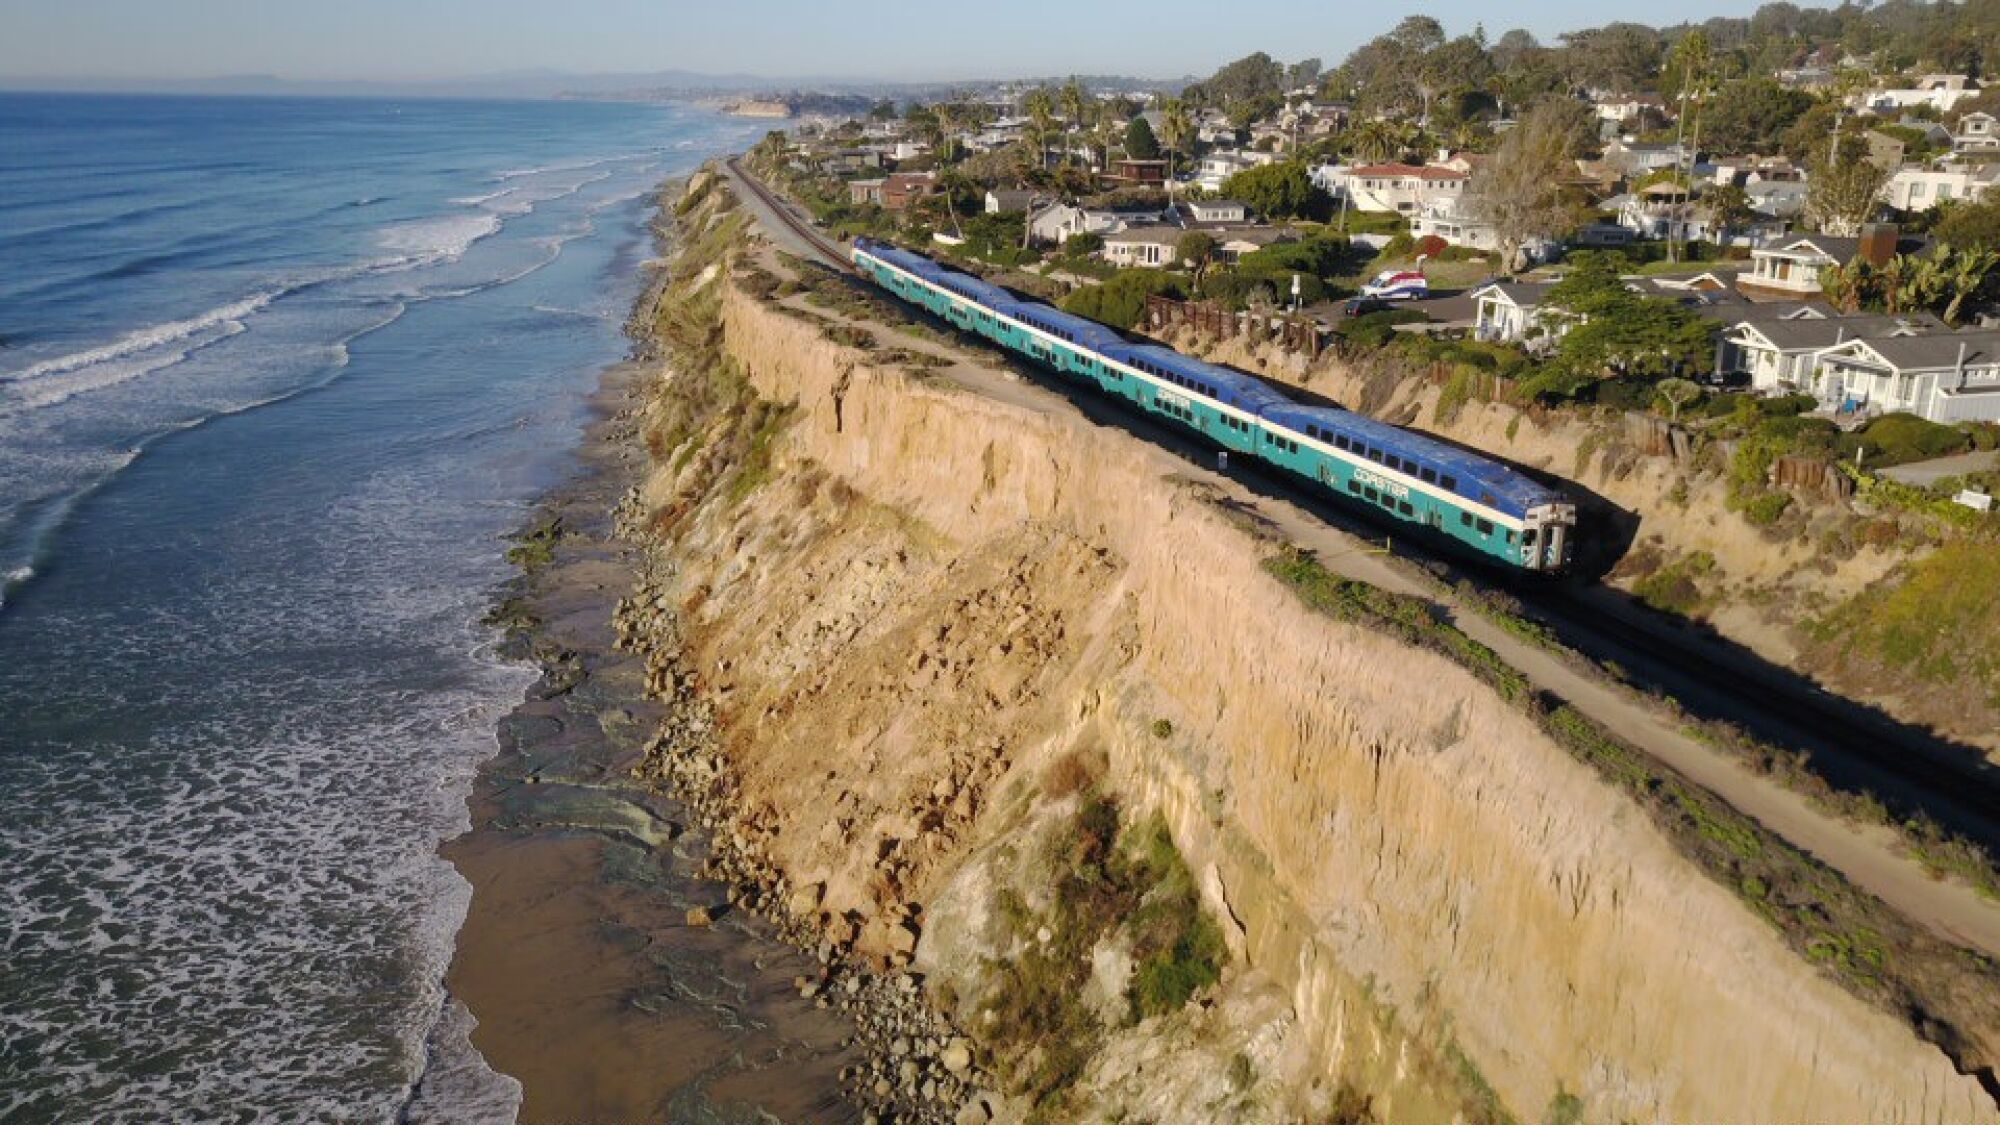 A Coaster train headed southbound in 2019 along the crumbling cliffs in Del Mar.